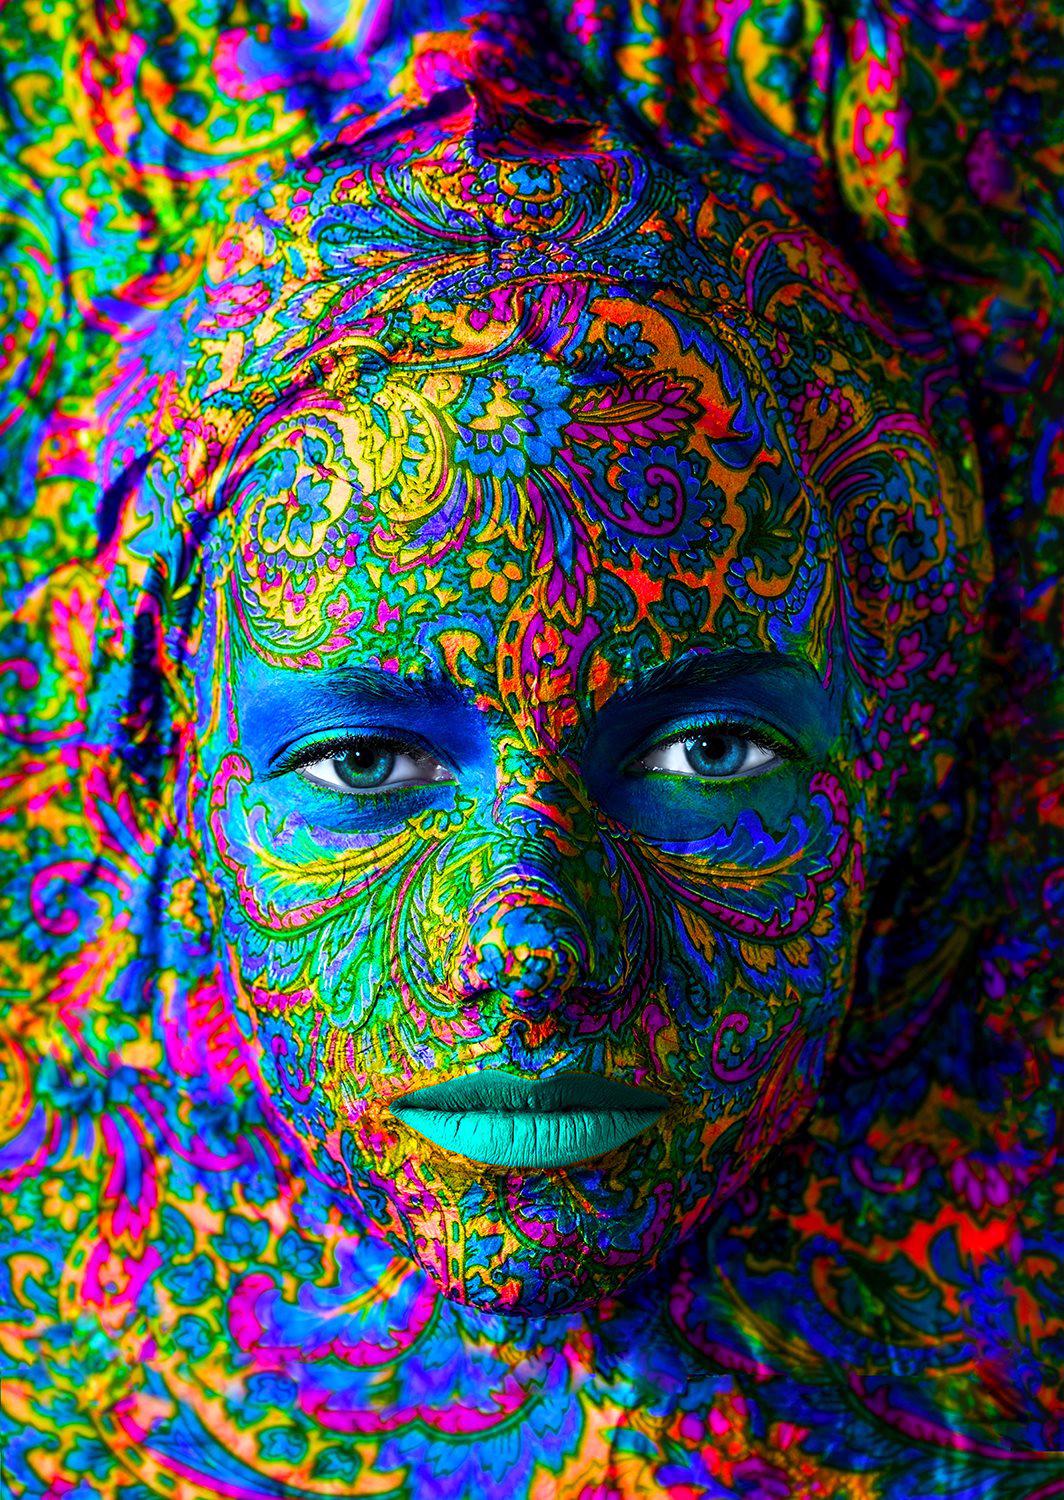 Woman with Color Art Makeup